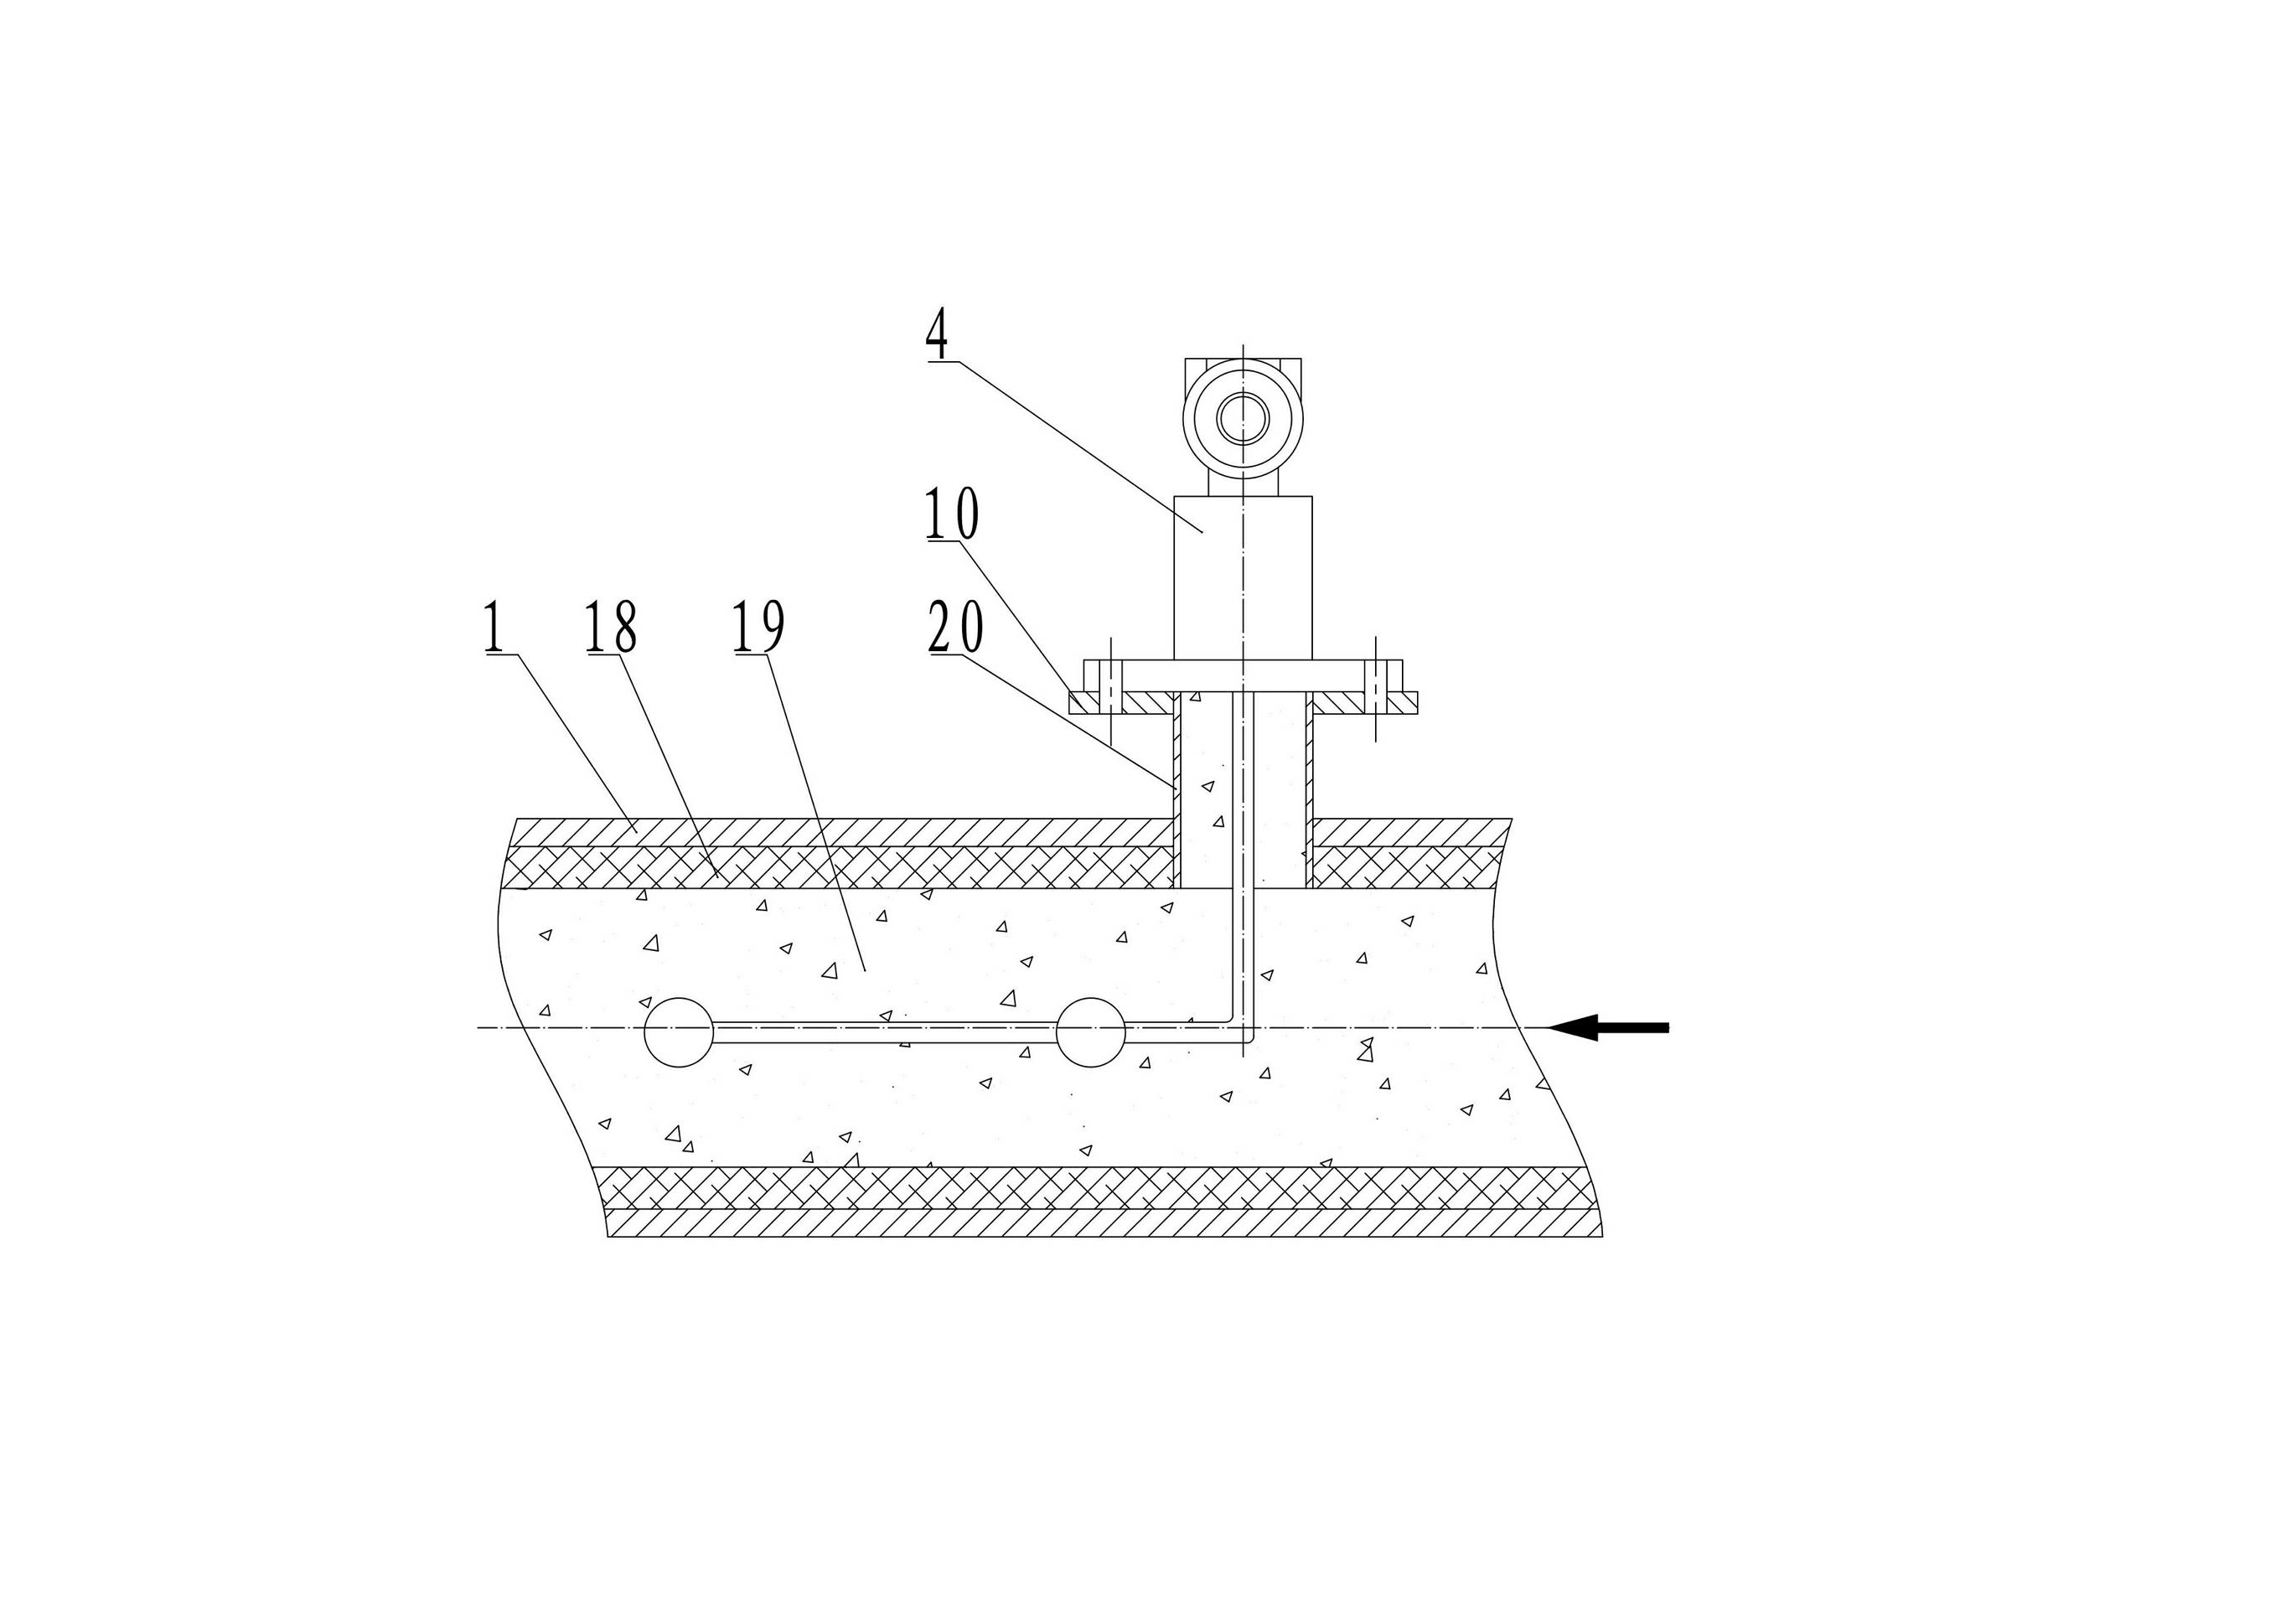 Main-pipe-type on-line pulp-concentration sampling measurement device